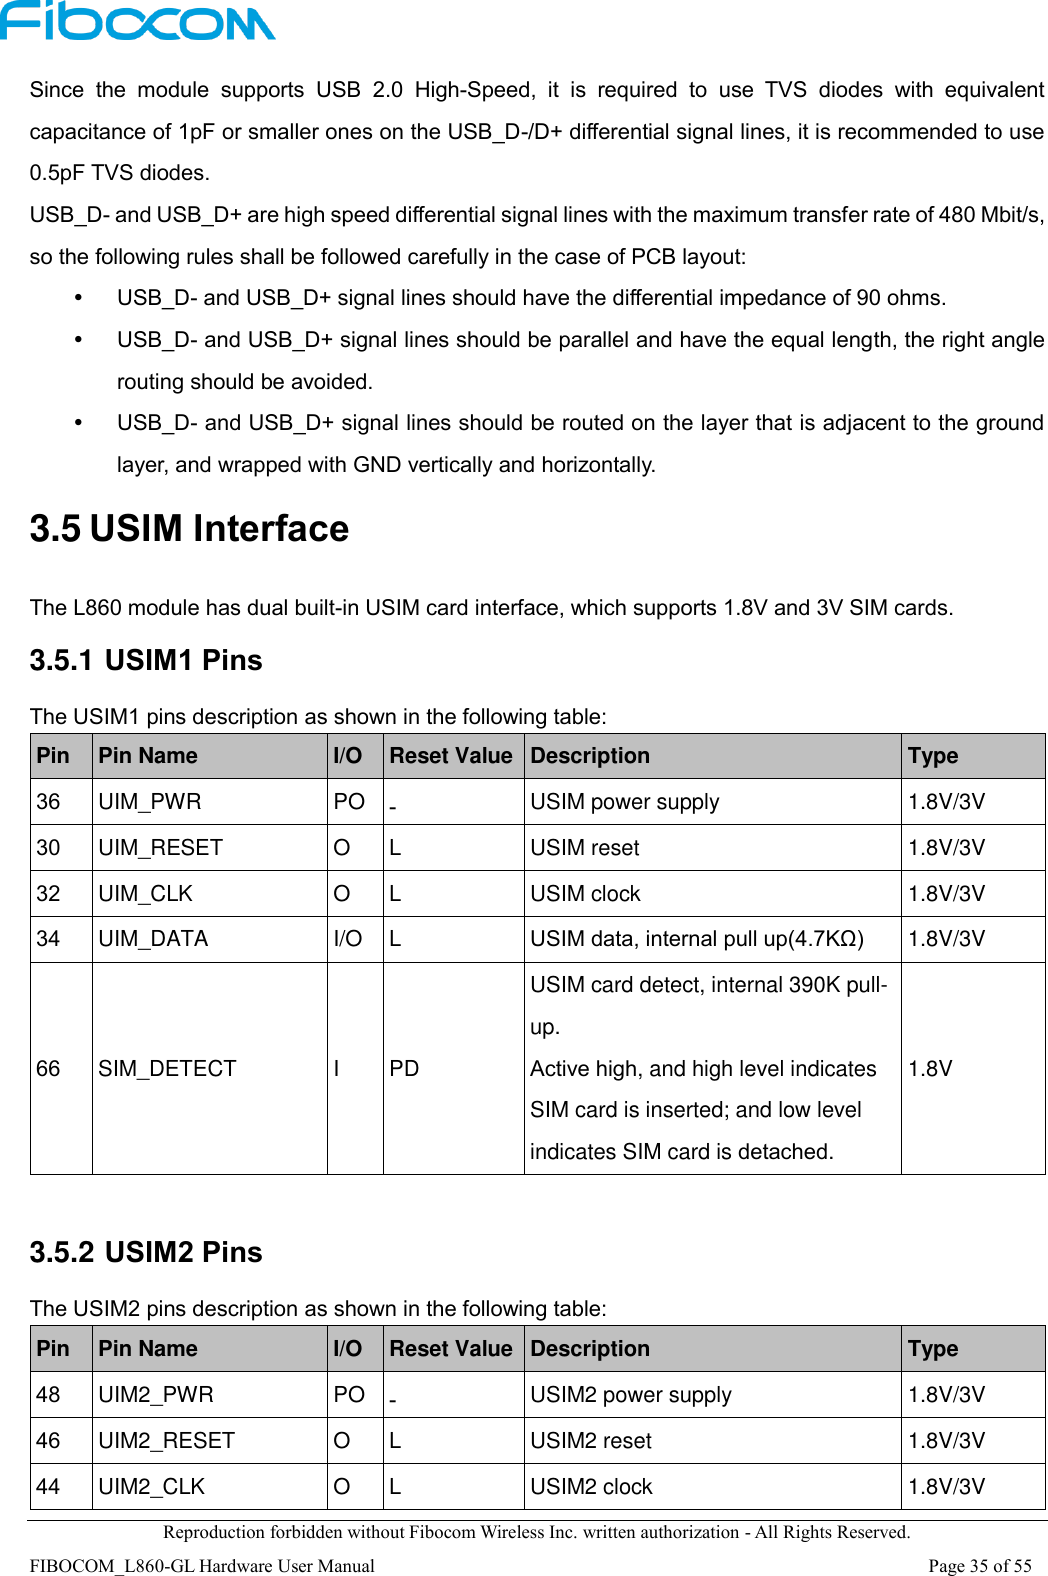  Reproduction forbidden without Fibocom Wireless Inc. written authorization - All Rights Reserved. FIBOCOM_L860-GL Hardware User Manual                                                                                                                      Page 35 of 55 Since  the  module  supports  USB  2.0  High-Speed,  it  is  required  to  use  TVS  diodes  with  equivalent capacitance of 1pF or smaller ones on the USB_D-/D+ differential signal lines, it is recommended to use 0.5pF TVS diodes.   USB_D- and USB_D+ are high speed differential signal lines with the maximum transfer rate of 480 Mbit/s, so the following rules shall be followed carefully in the case of PCB layout:  USB_D- and USB_D+ signal lines should have the differential impedance of 90 ohms.  USB_D- and USB_D+ signal lines should be parallel and have the equal length, the right angle routing should be avoided.  USB_D- and USB_D+ signal lines should be routed on the layer that is adjacent to the ground layer, and wrapped with GND vertically and horizontally. 3.5 USIM Interface The L860 module has dual built-in USIM card interface, which supports 1.8V and 3V SIM cards. 3.5.1 USIM1 Pins The USIM1 pins description as shown in the following table: Pin Pin Name I/O Reset Value Description Type 36 UIM_PWR PO - USIM power supply 1.8V/3V 30 UIM_RESET O L USIM reset 1.8V/3V 32 UIM_CLK O L USIM clock 1.8V/3V 34 UIM_DATA I/O L USIM data, internal pull up(4.7KΩ) 1.8V/3V 66 SIM_DETECT I PD USIM card detect, internal 390K pull-up. Active high, and high level indicates SIM card is inserted; and low level indicates SIM card is detached. 1.8V  3.5.2 USIM2 Pins The USIM2 pins description as shown in the following table: Pin Pin Name I/O Reset Value Description Type 48 UIM2_PWR PO - USIM2 power supply 1.8V/3V 46 UIM2_RESET O L USIM2 reset 1.8V/3V 44 UIM2_CLK O L USIM2 clock 1.8V/3V 